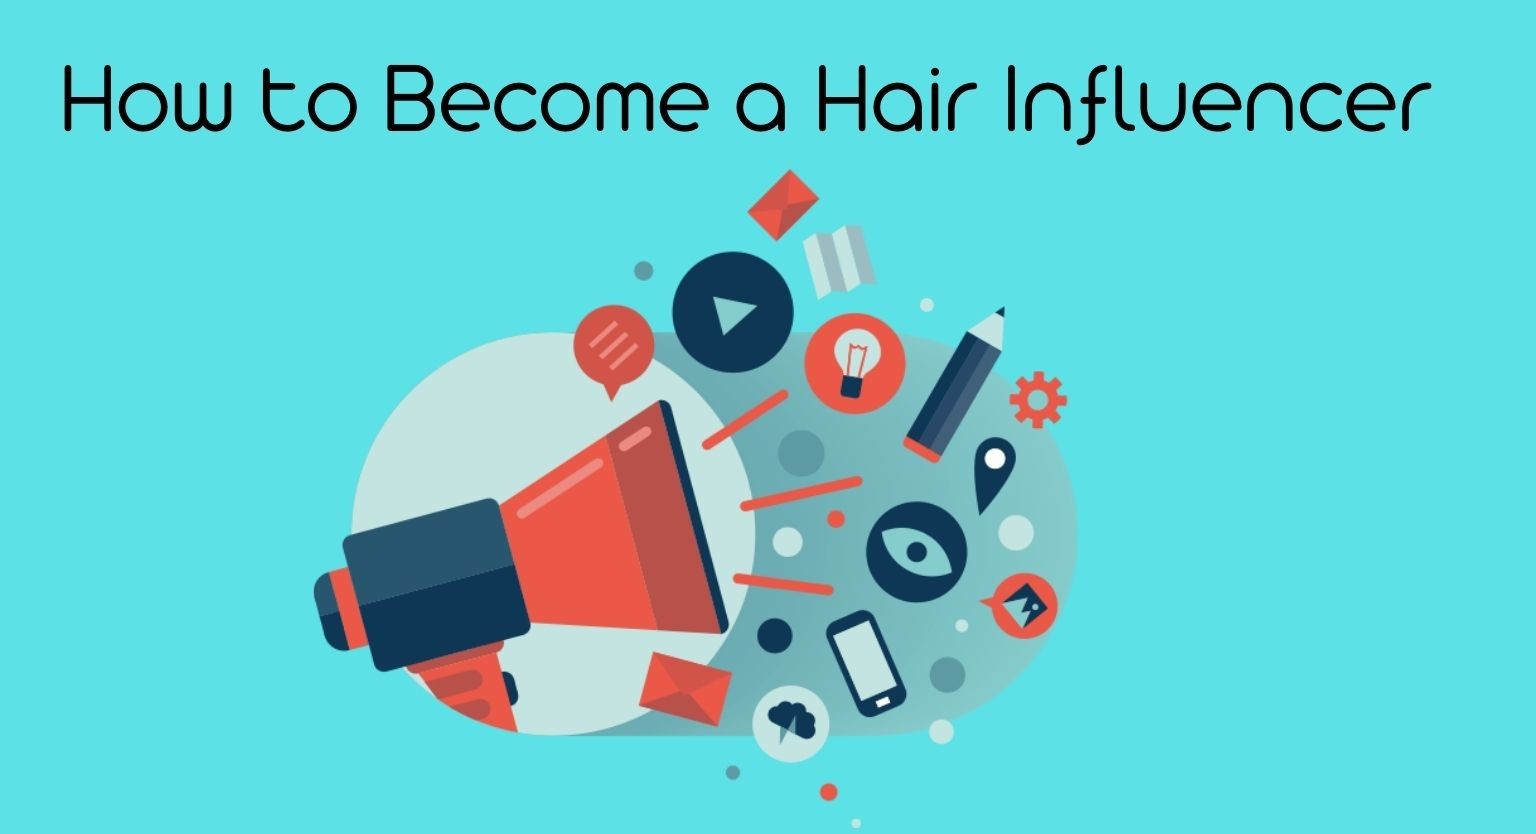 How to Become a Hair Influencer